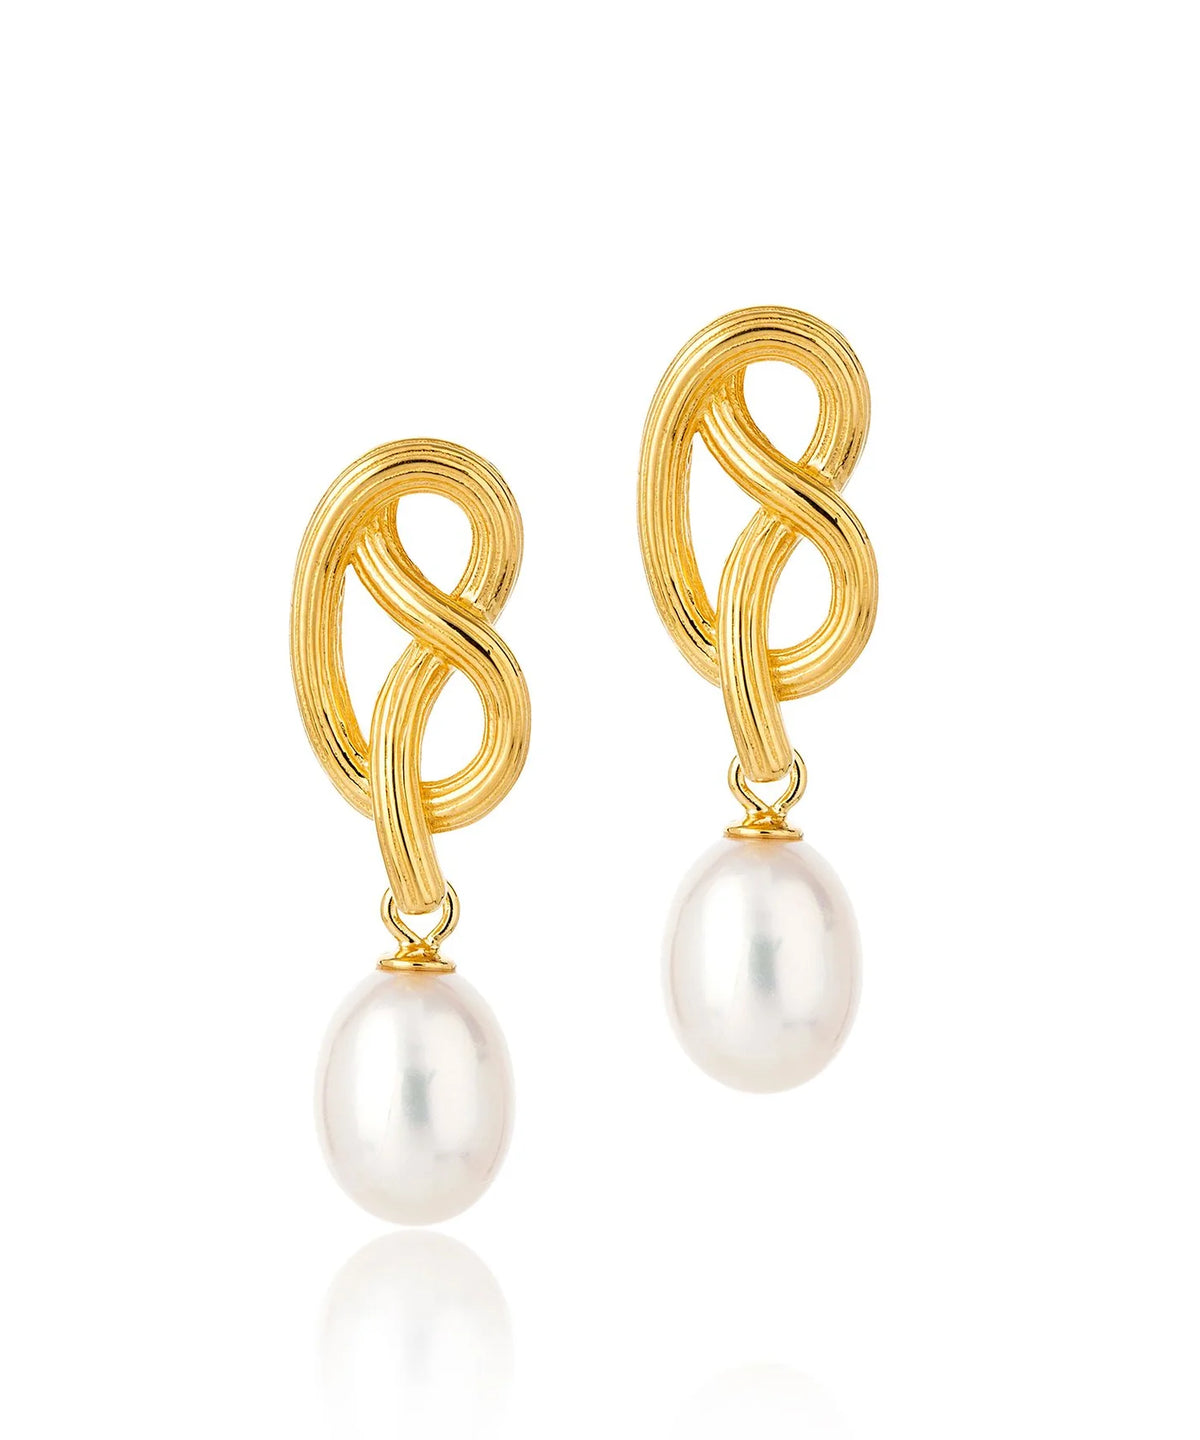 Gold twisted earring with post and butterfly fastening with single pearl drop